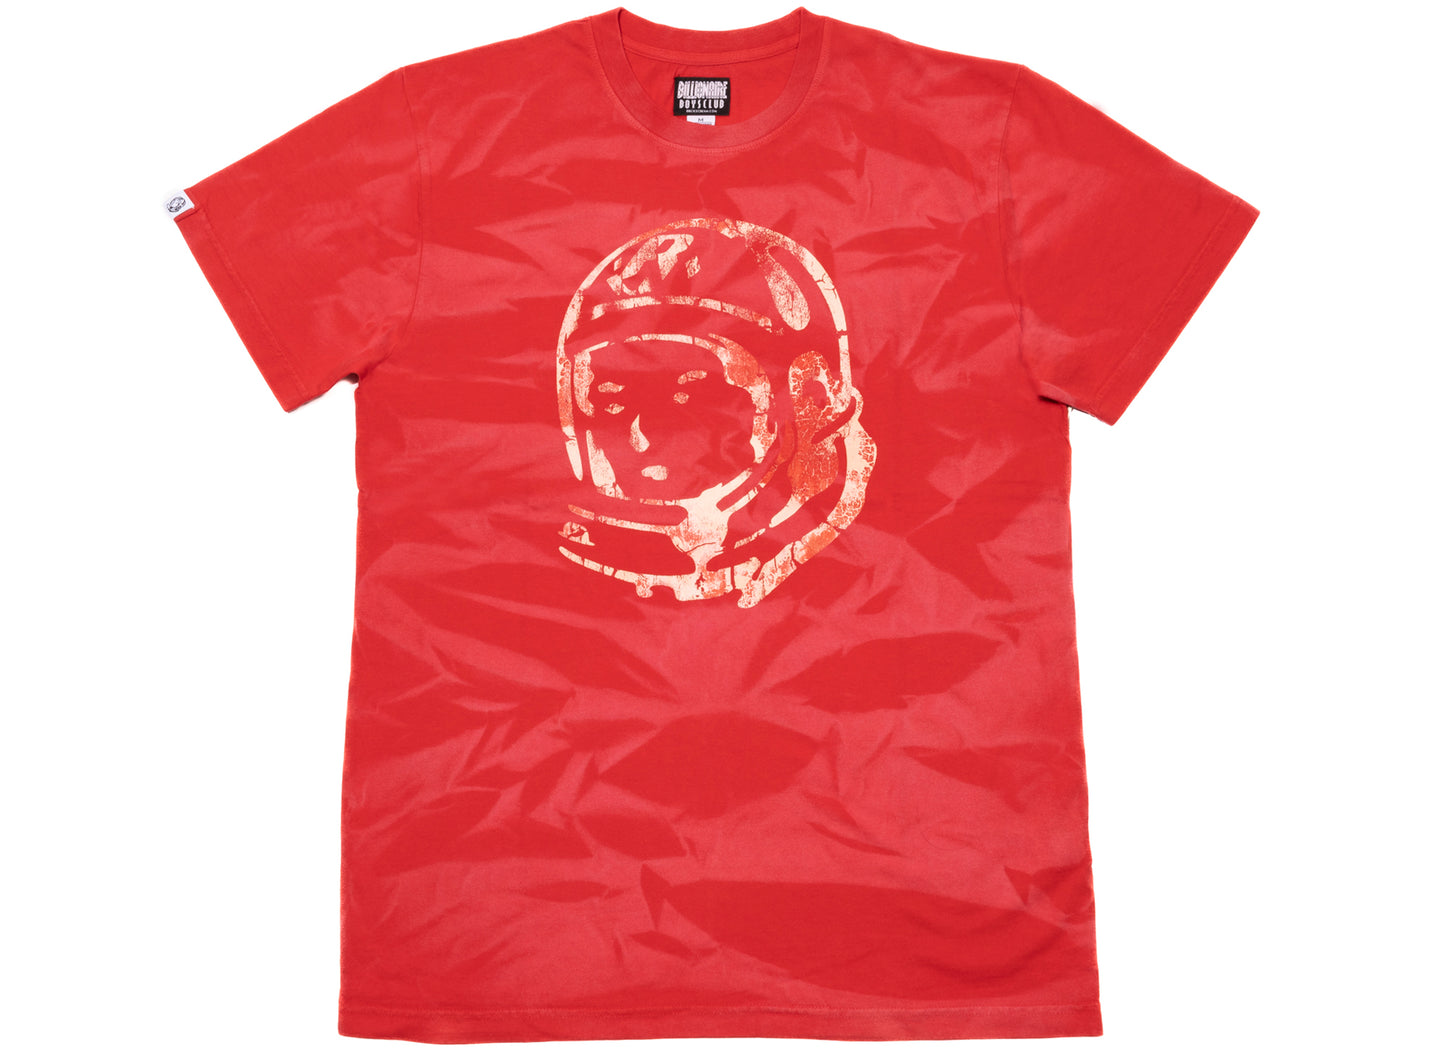 BBC Washed Helmet S/S Knit Tee in Red